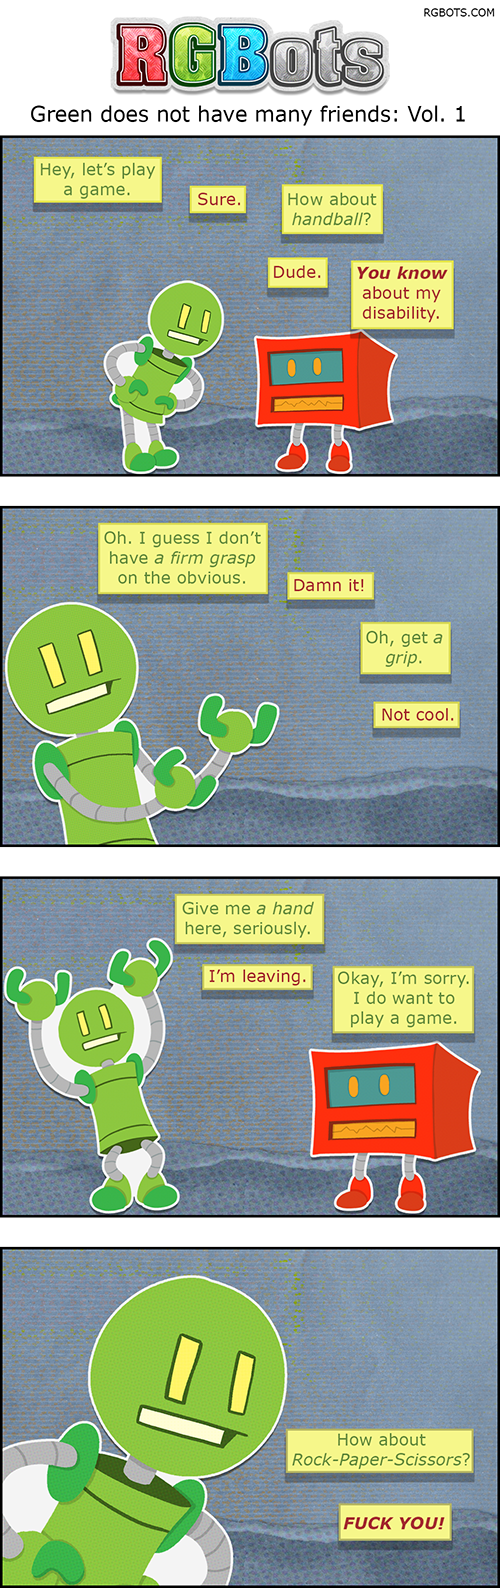 Green does not have many friends: Vol. 1